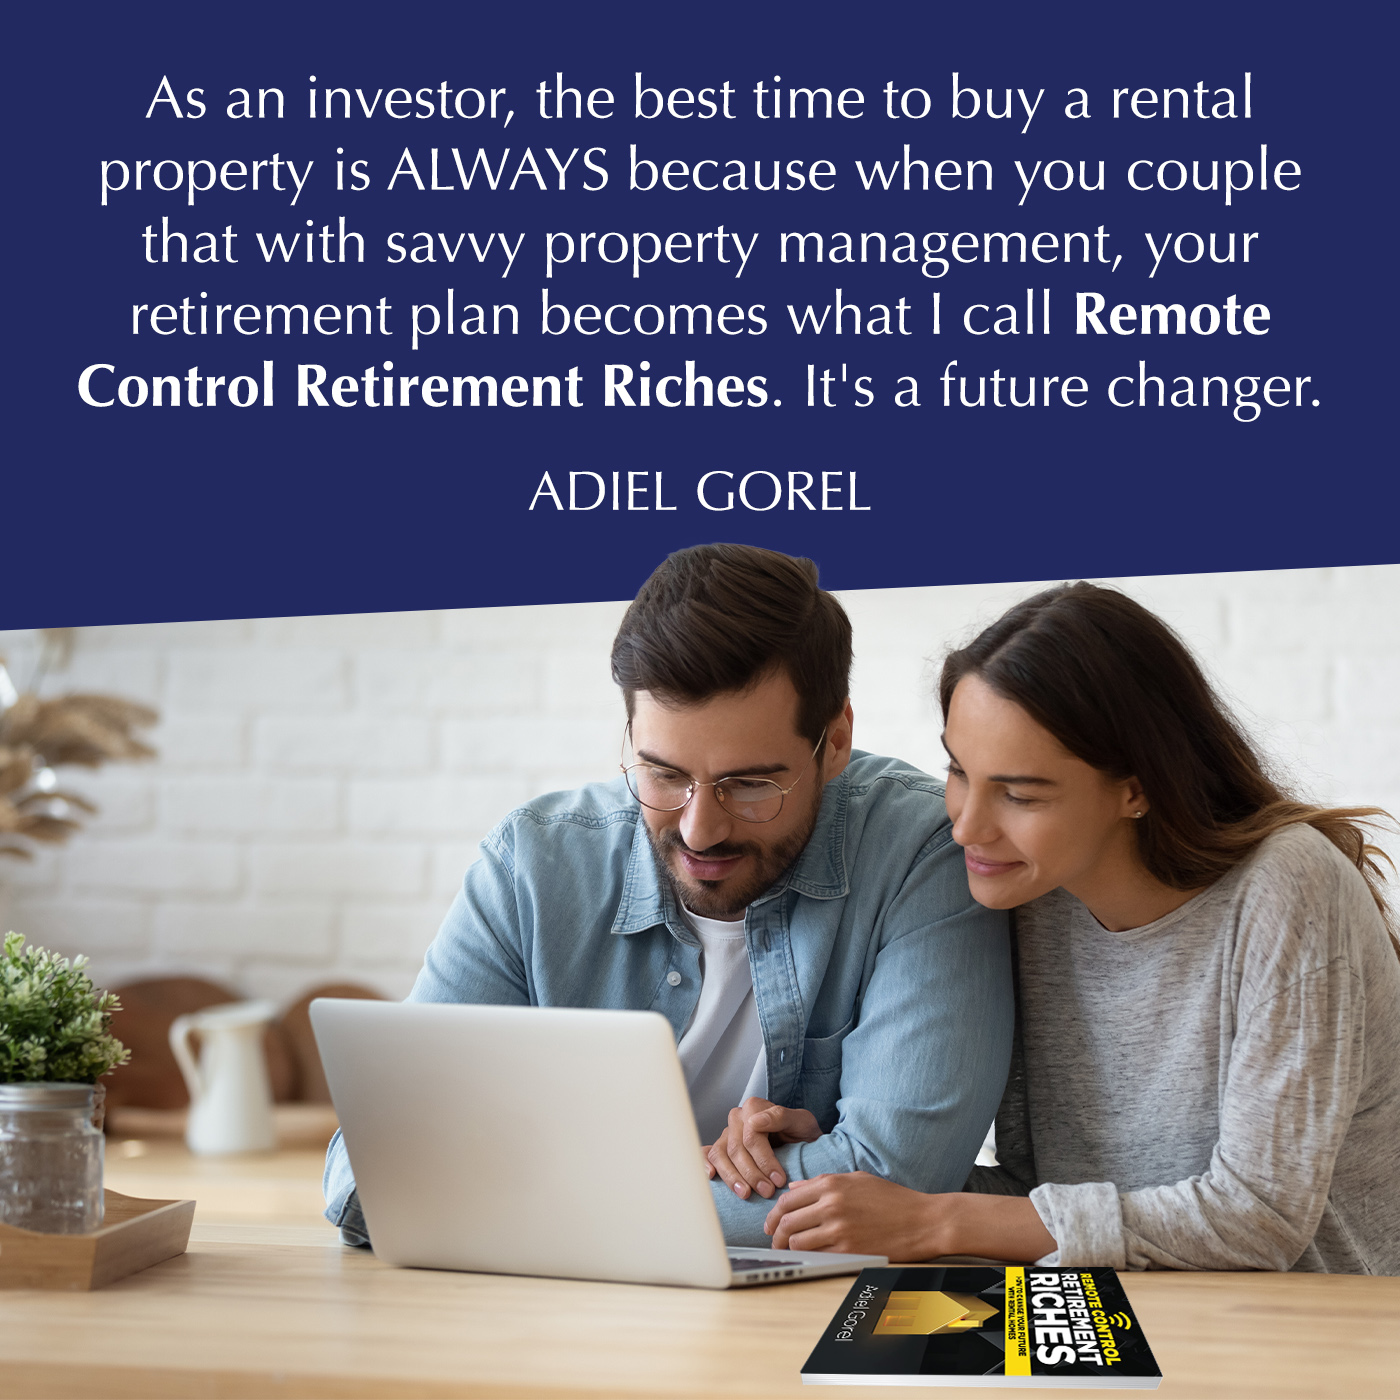 An Unlikely Savior Rises To Help Us Retire Well: The  Rental Property Manager